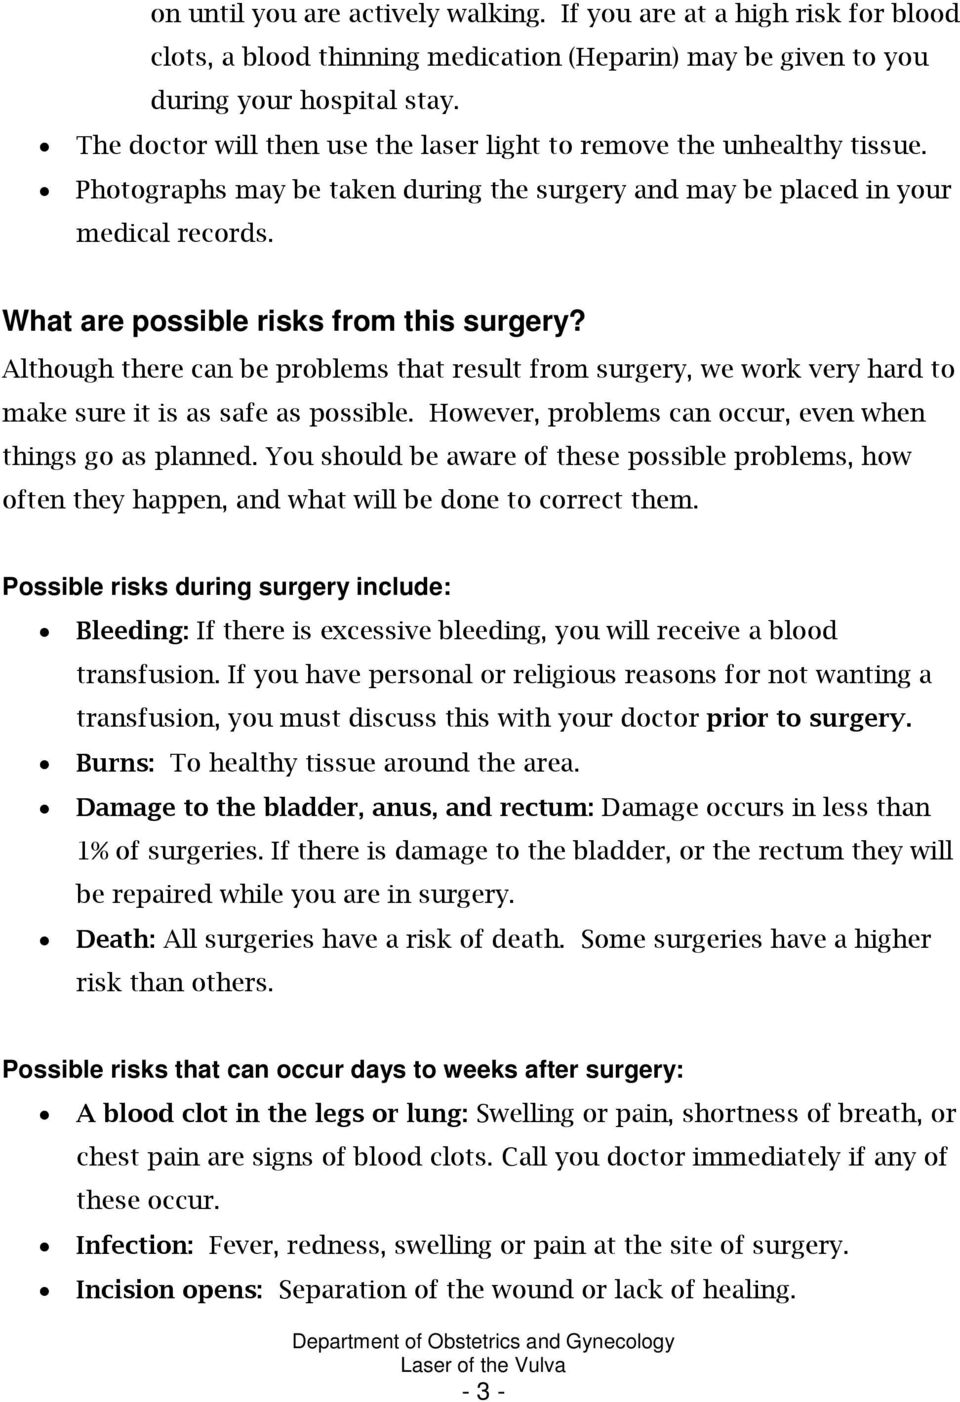 What are possible risks from this surgery? Although there can be problems that result from surgery, we work very hard to make sure it is as safe as possible.